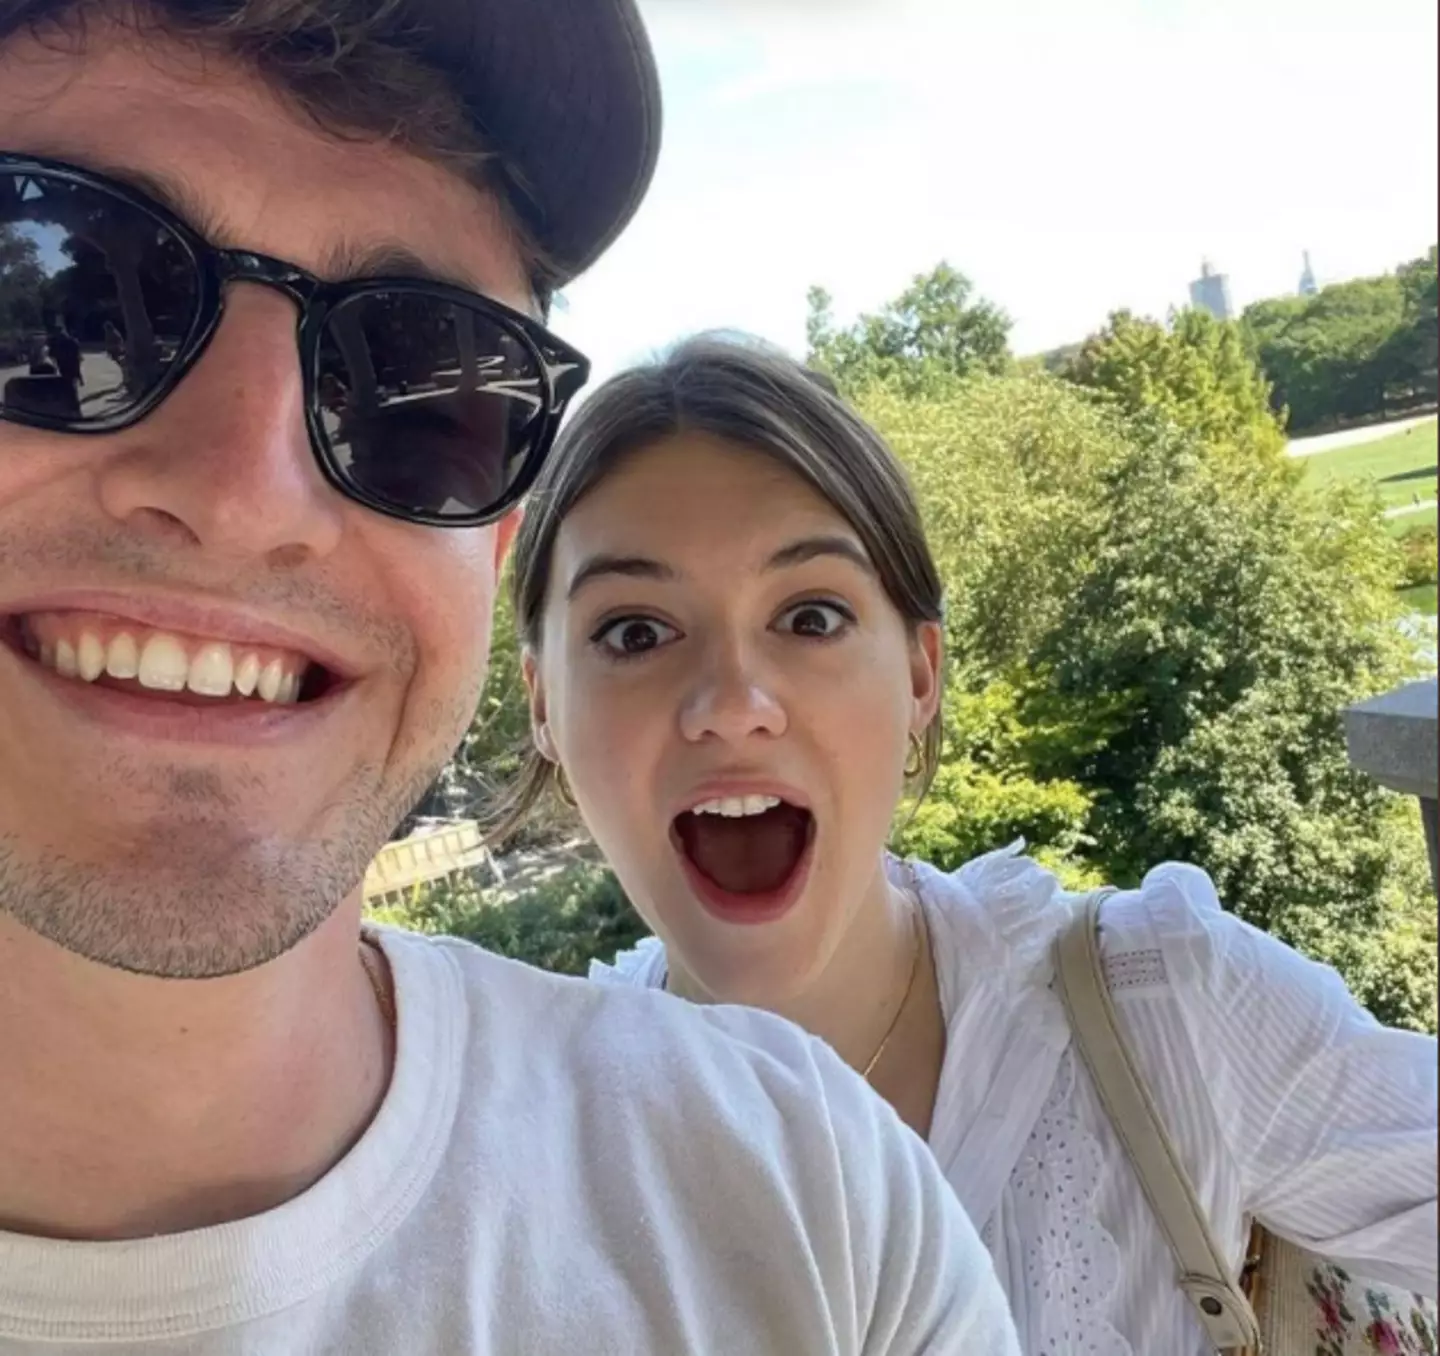 Paul and Daisy have been hanging out in New York (